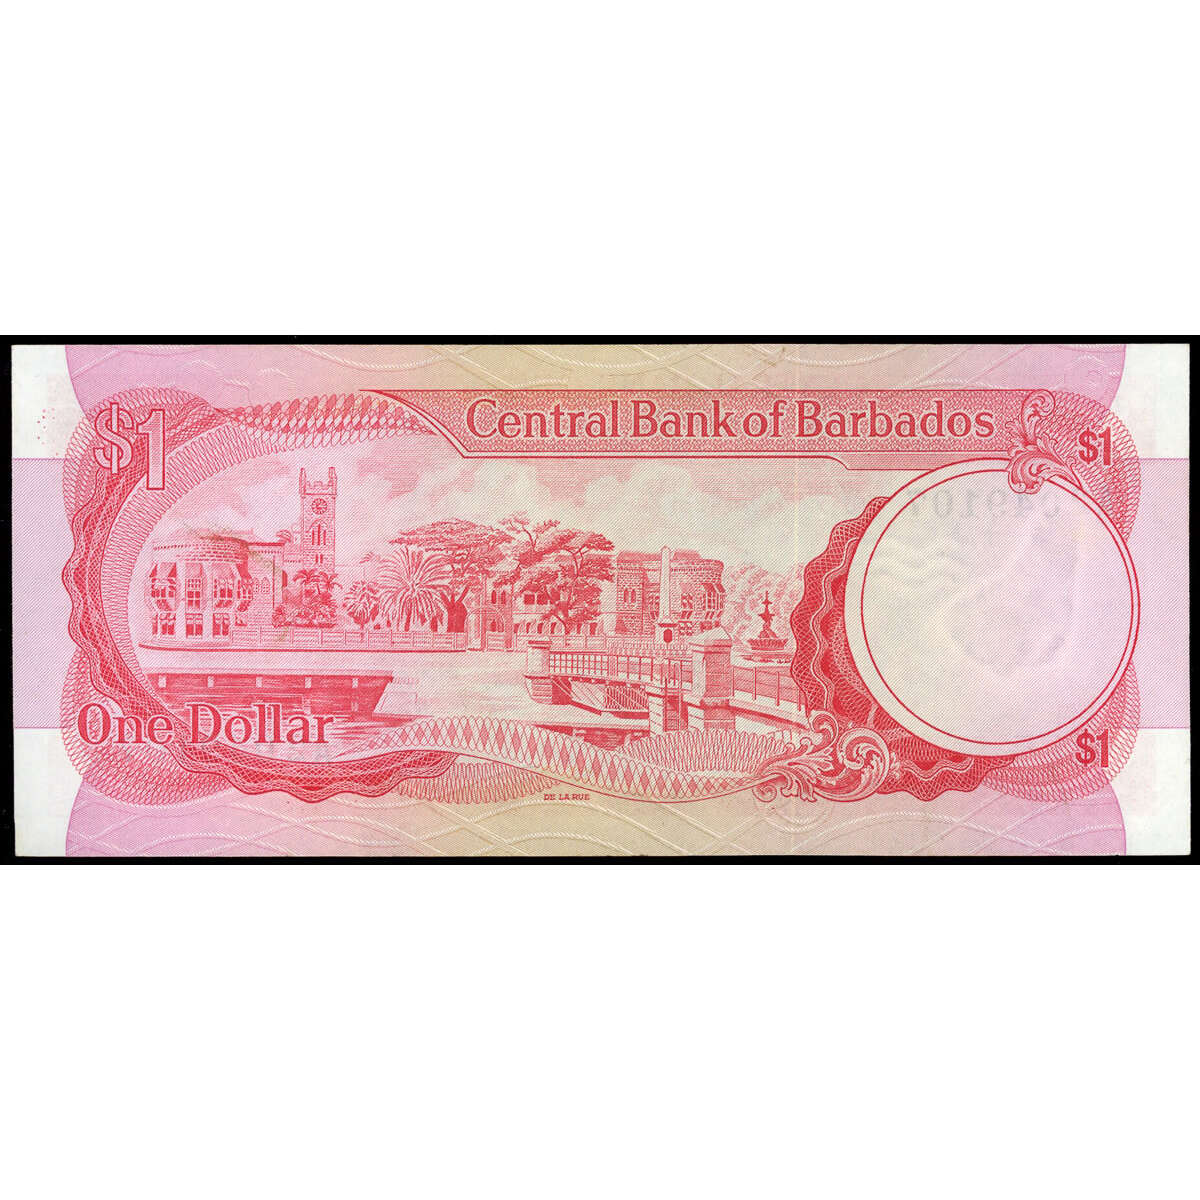 Barbados 1 Dollar 1973 Issued note. UNC-60